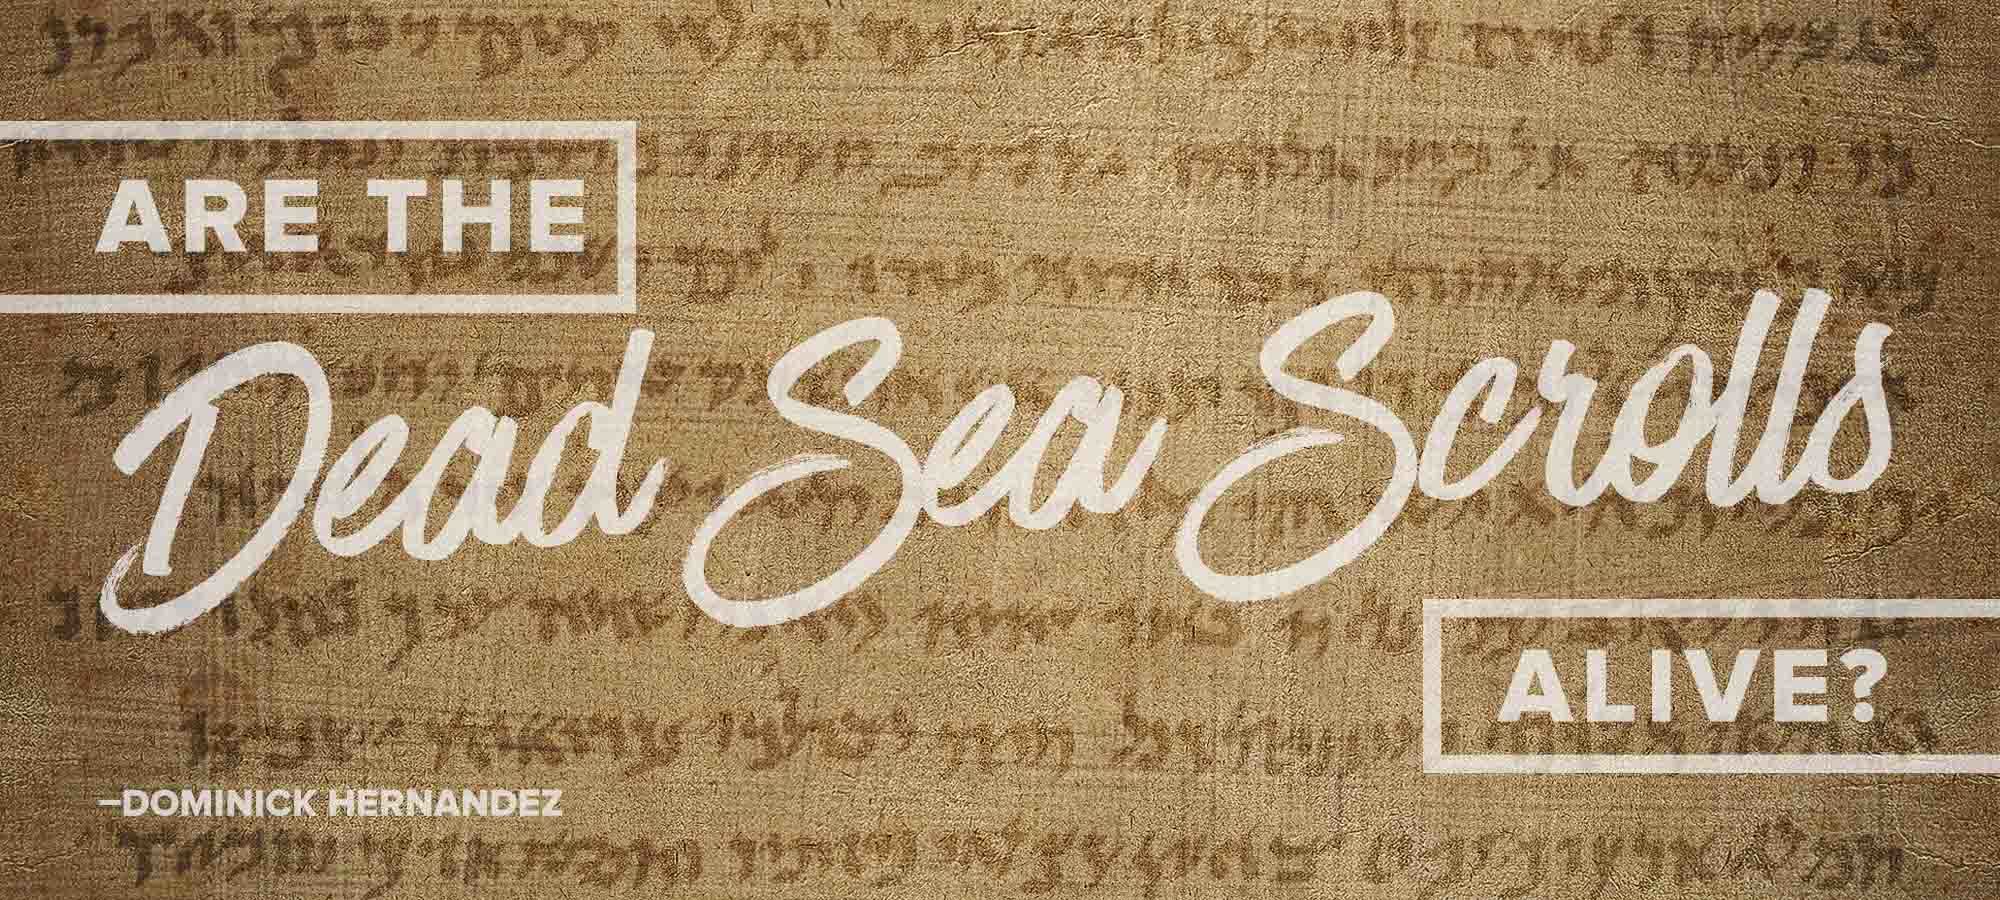 6 Things You May Not Know About the Dead Sea Scrolls